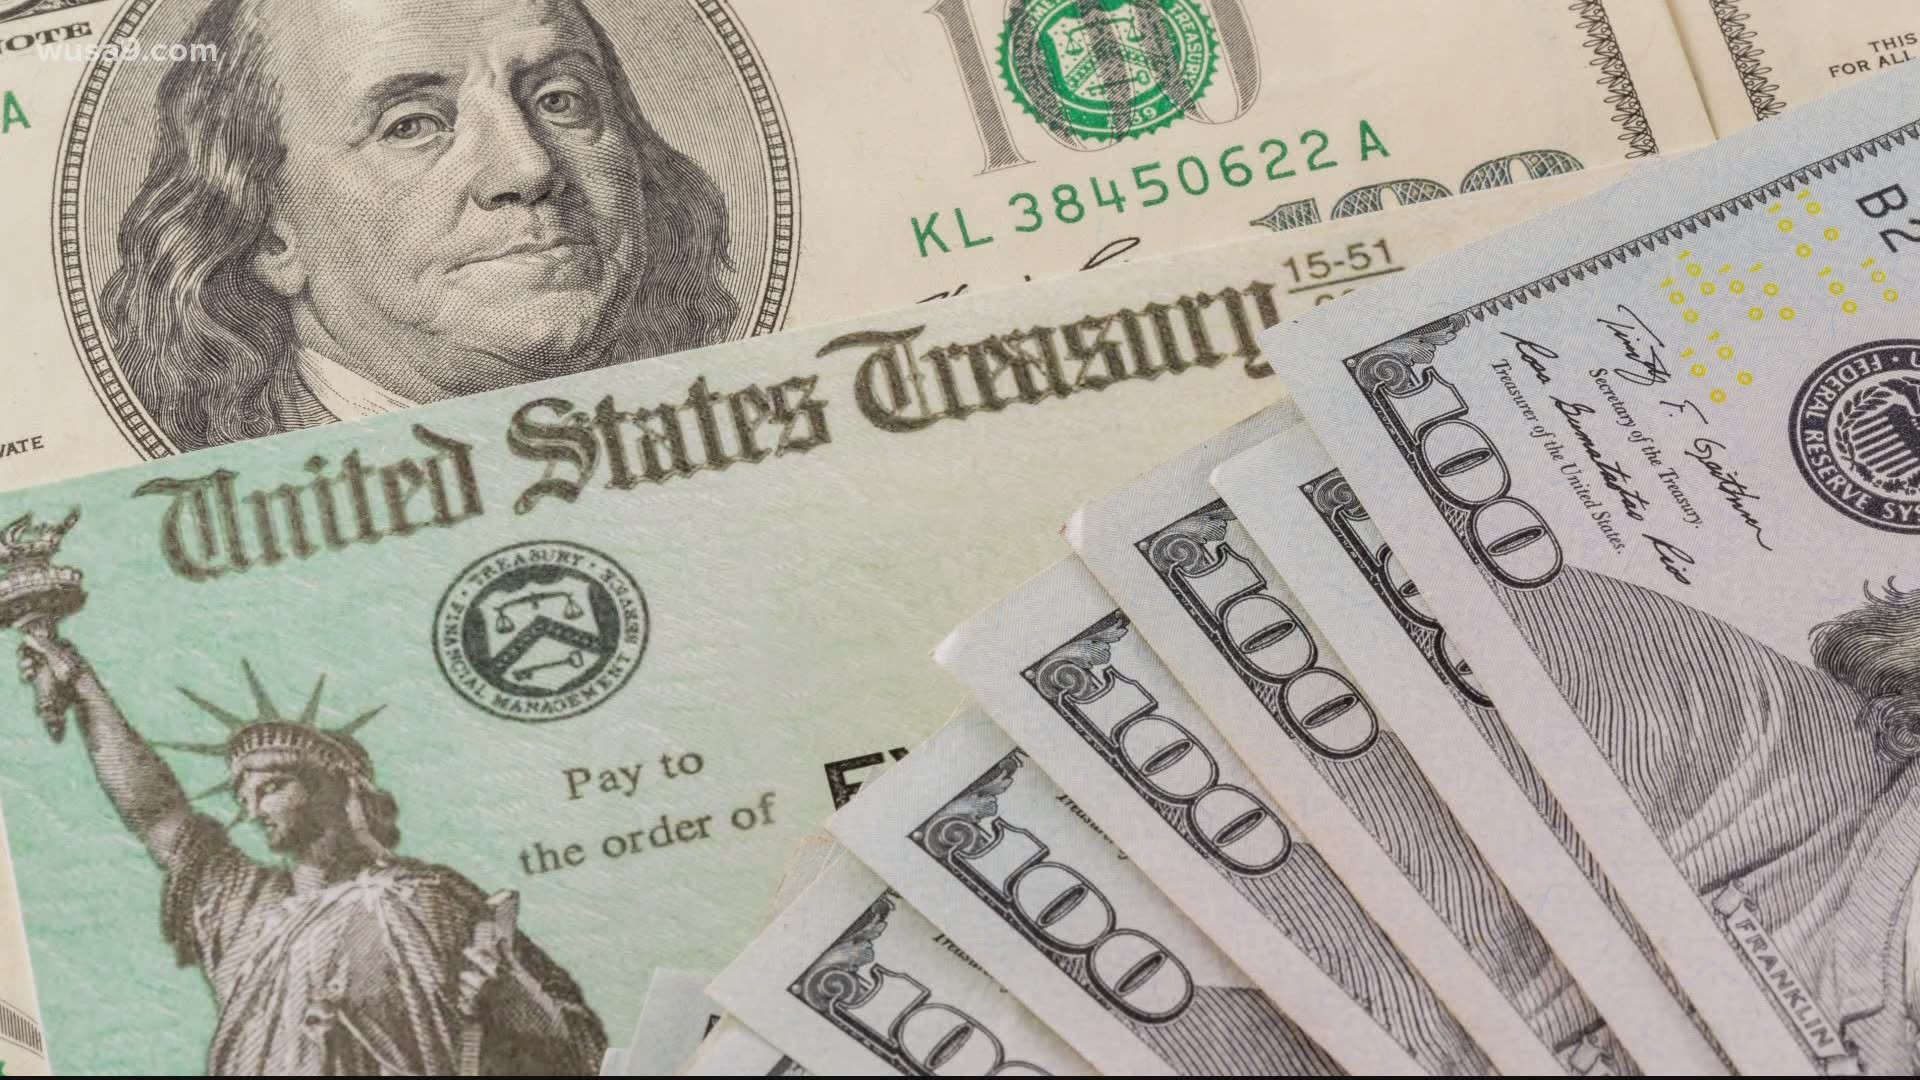 The second stimulus checks will base on your 2019 taxes so that they can go out quickly, but will later be adjusted and ultimately based on your 2020 tax returns.